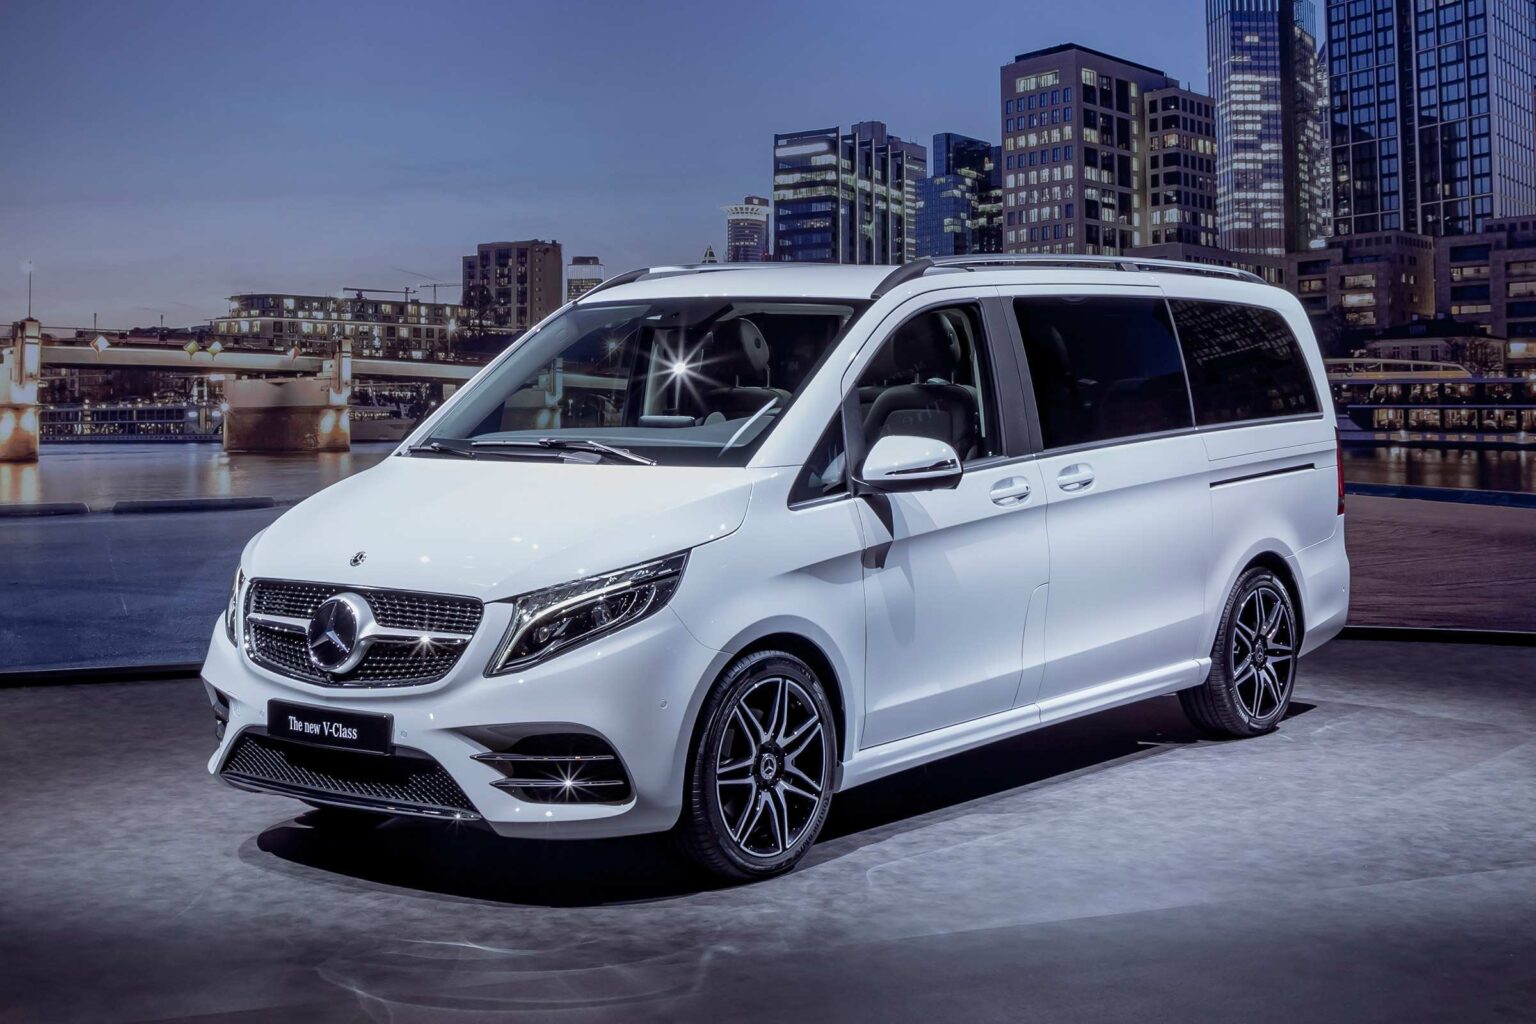 Why Choose the Mercedes V-Class for Your Next Trip in Watford and Hertfordshire